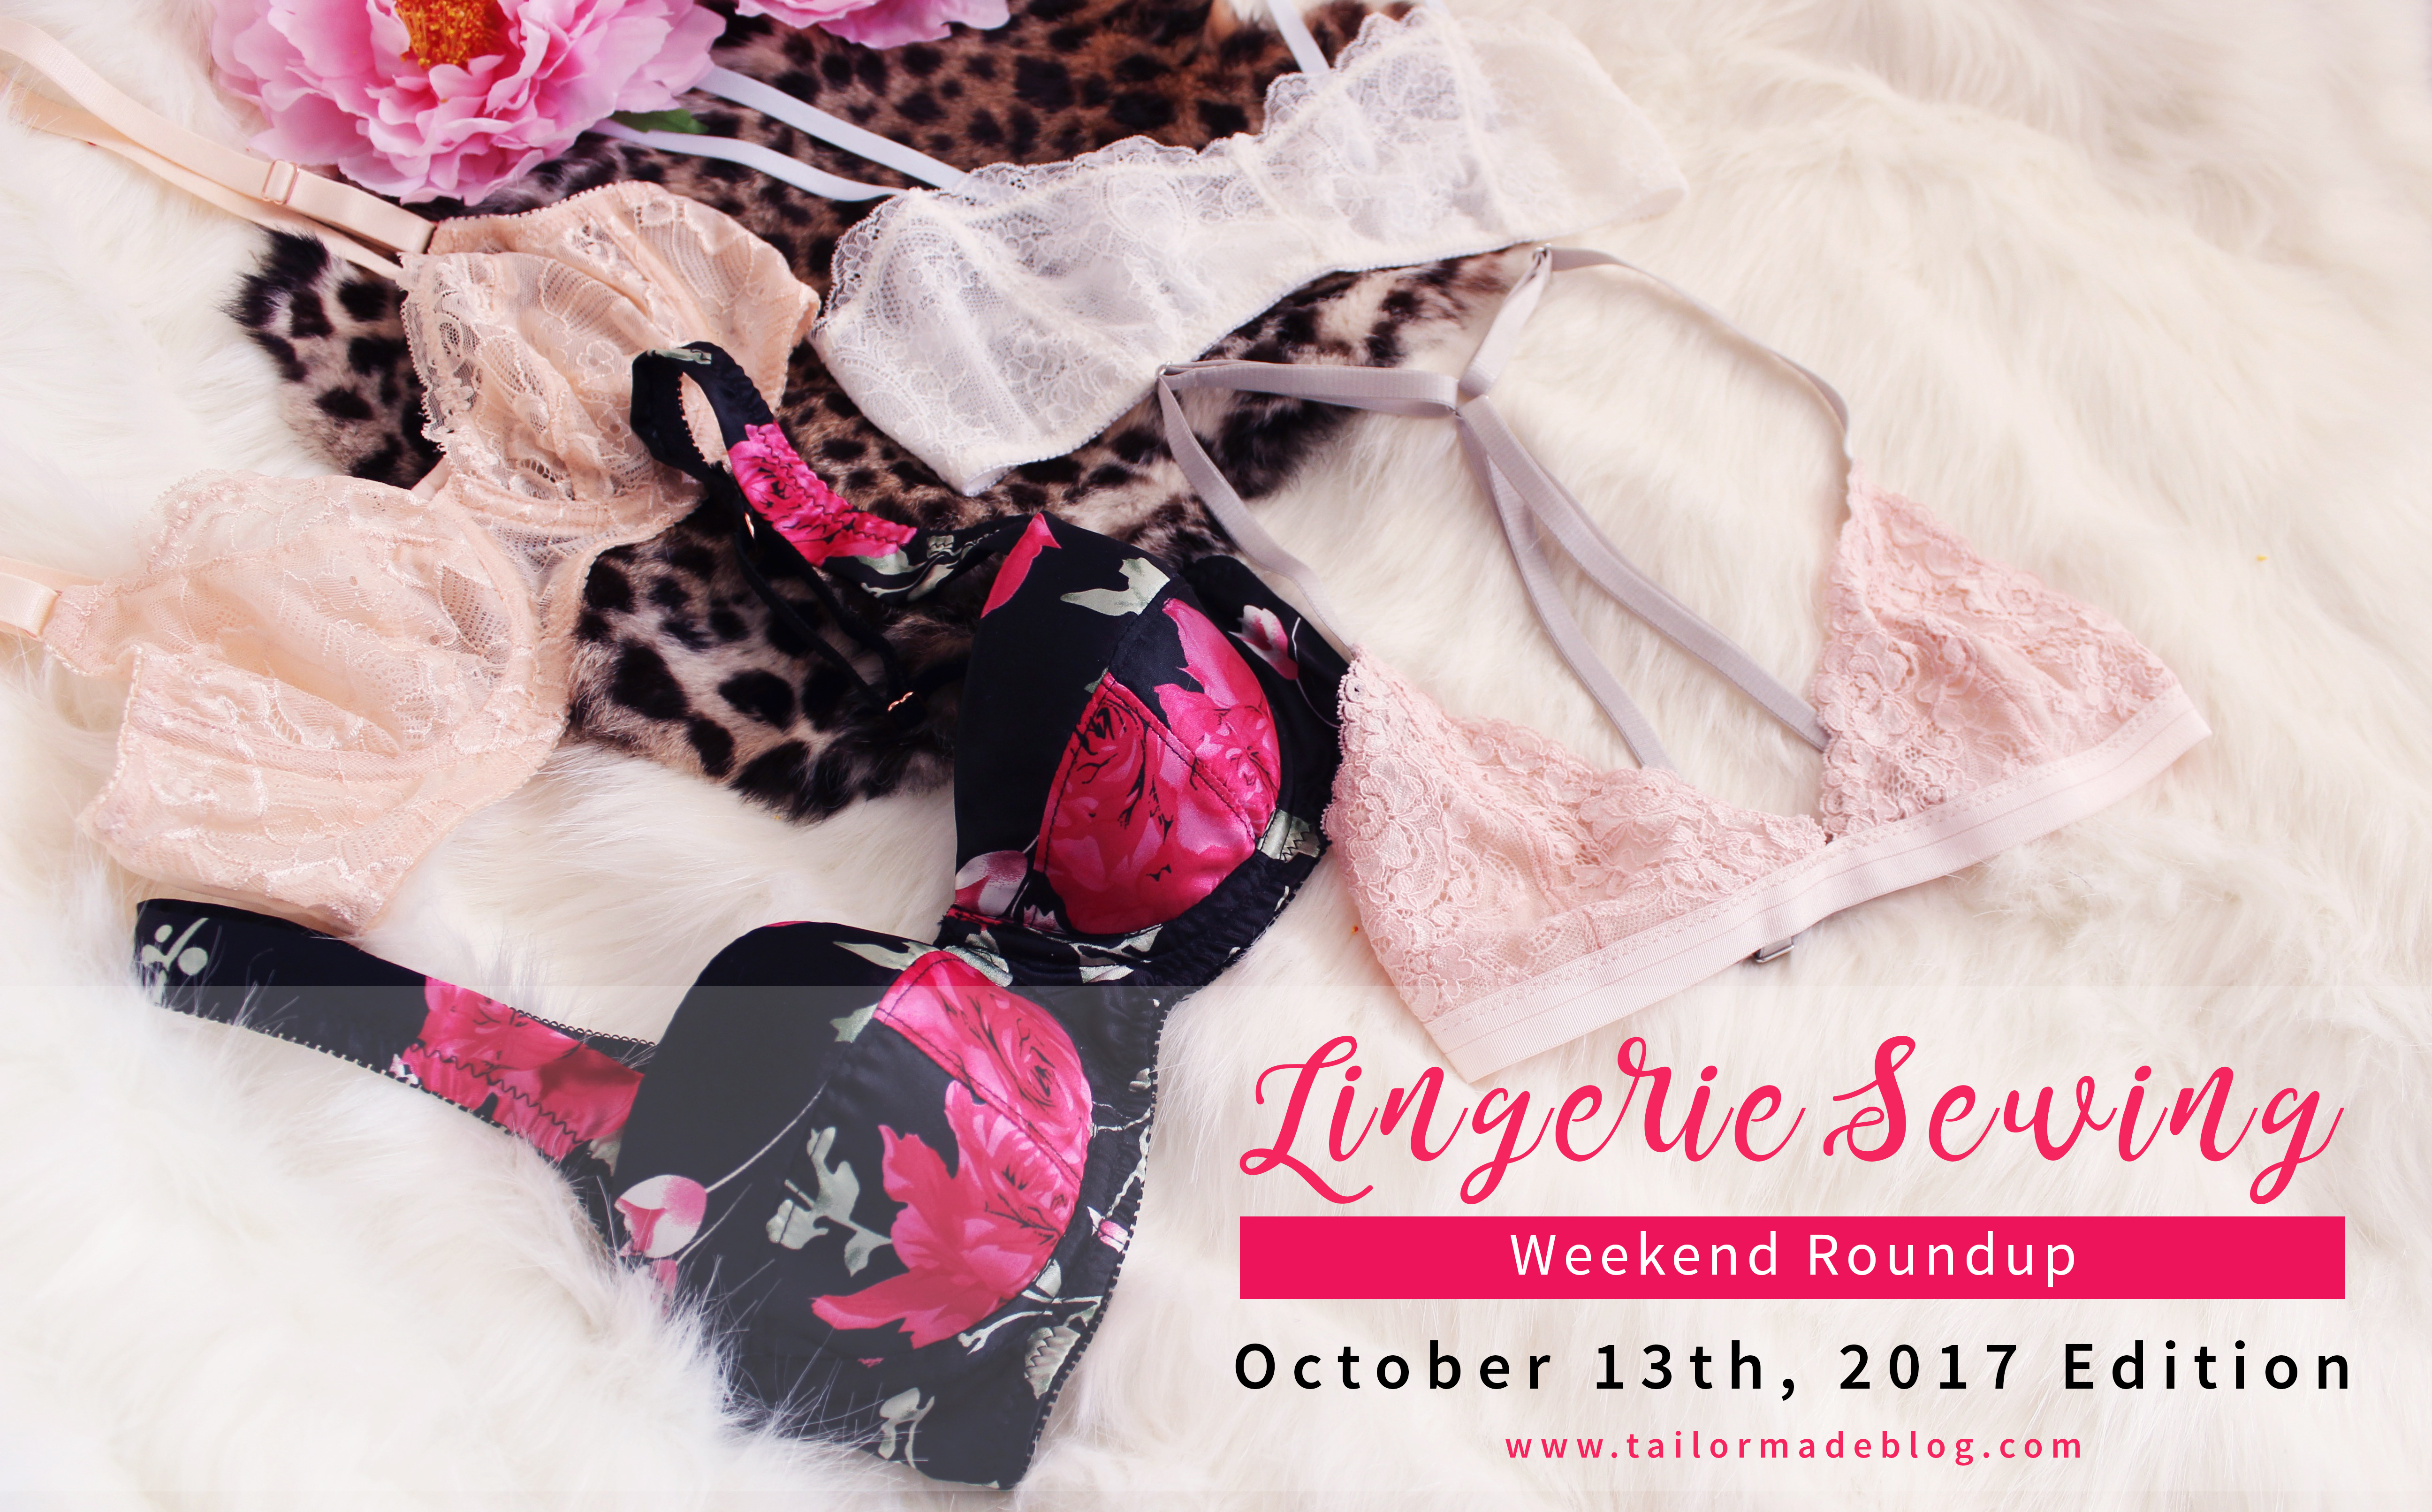 October 13th 2017 Lingerie Sewing Weekend Round Up Latest news and makes and sewing projects from the lingerie sewing bra making community